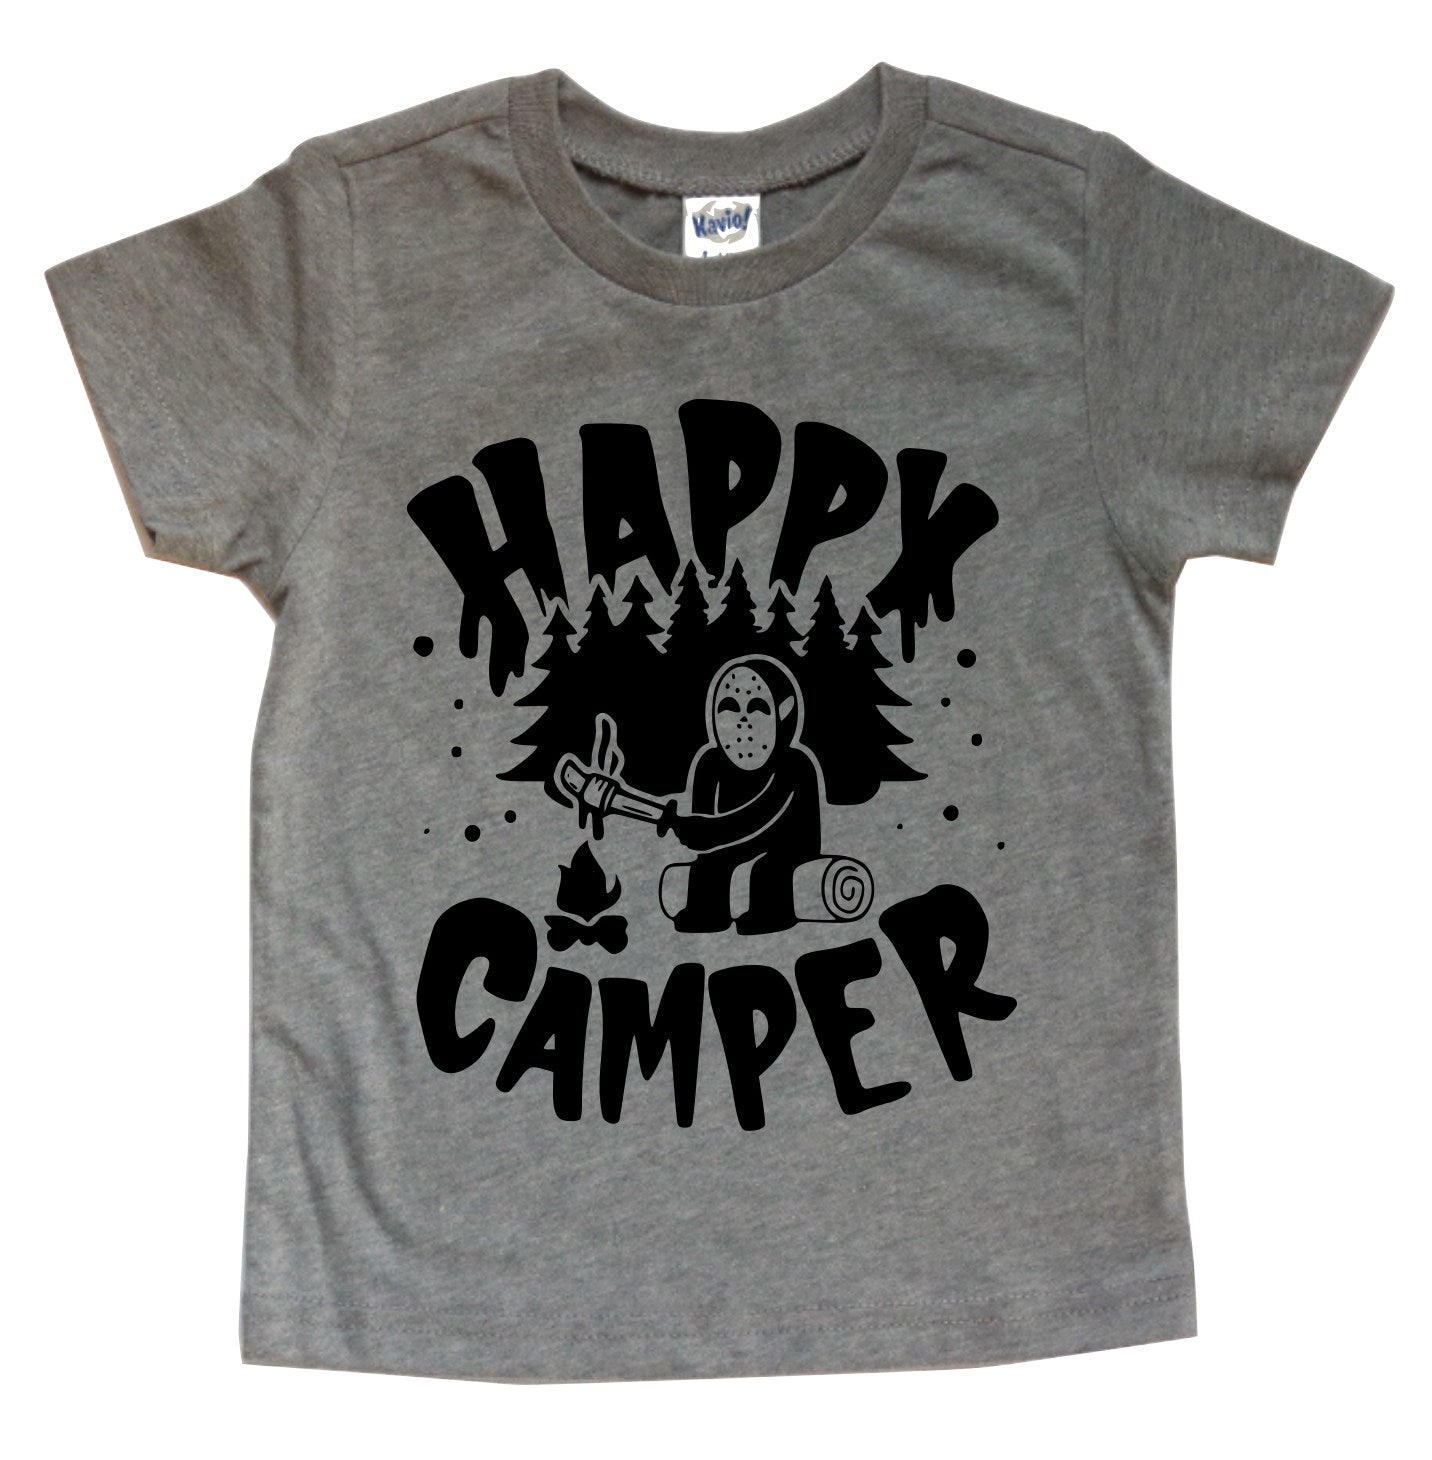 HAPPY CAMPER [FRIDAY 13TH EDITION] KIDS SHIRT